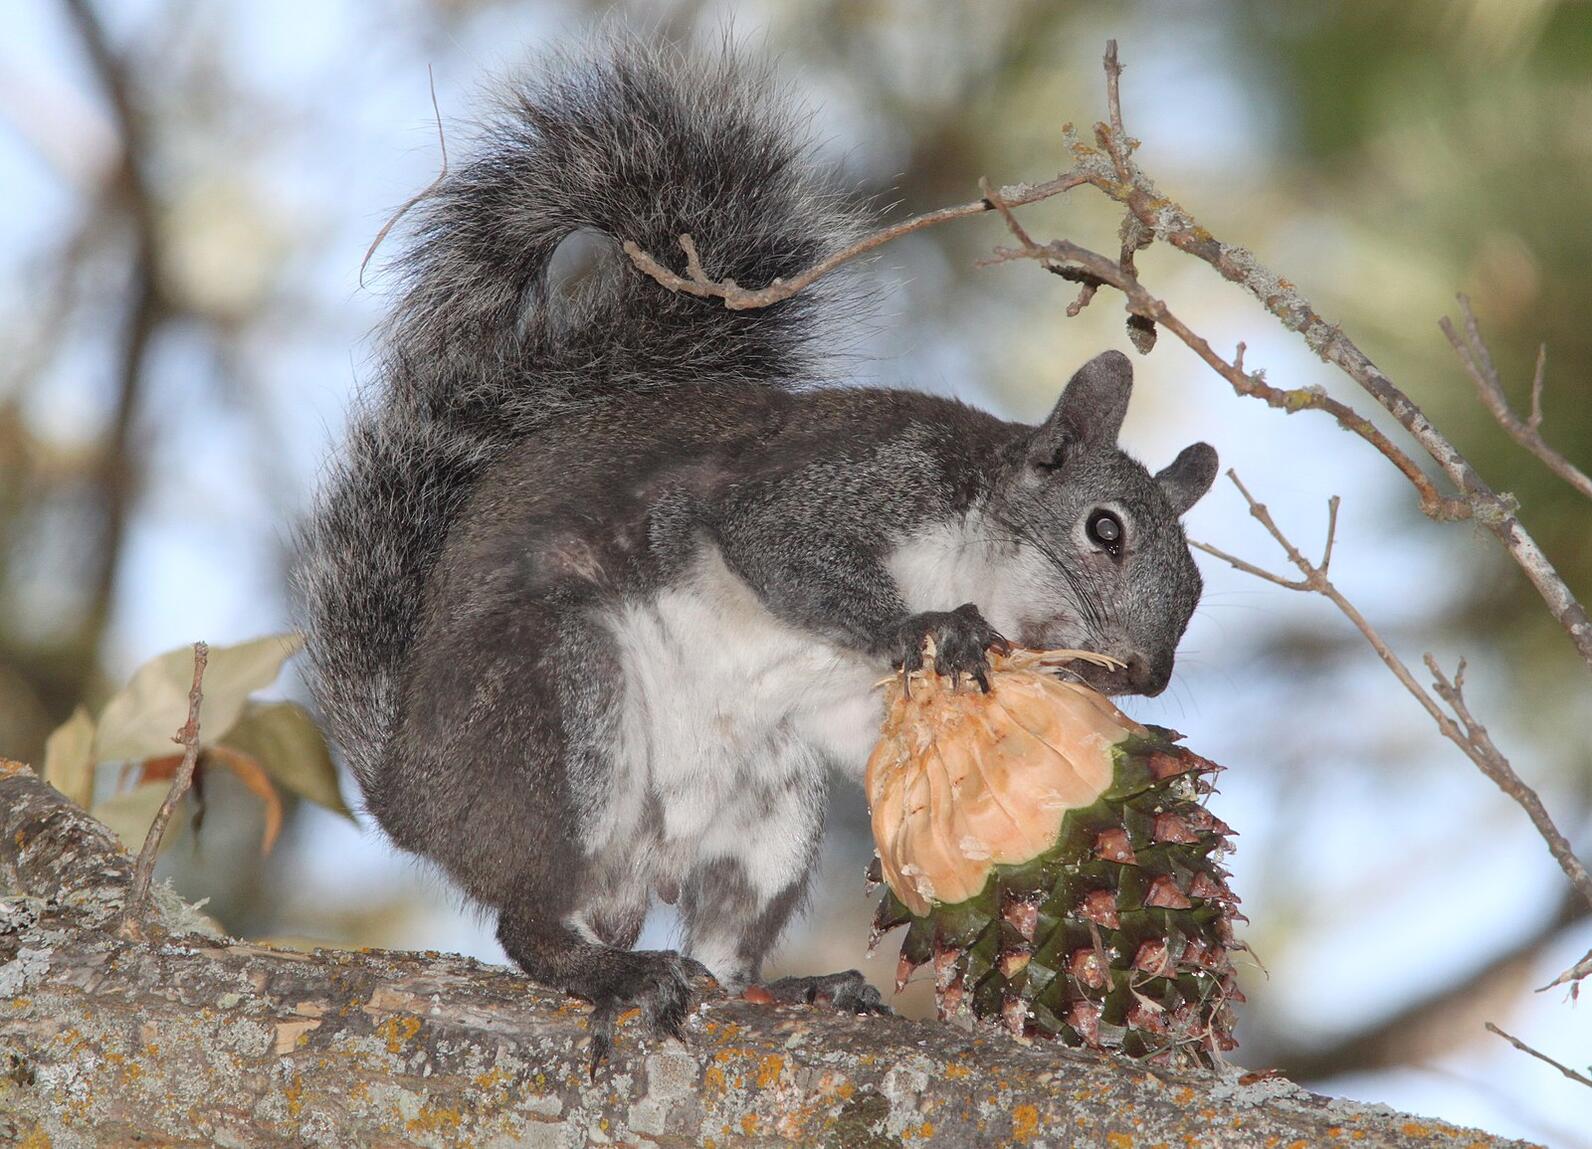 A Western Gray squirrel eating a pinecone.